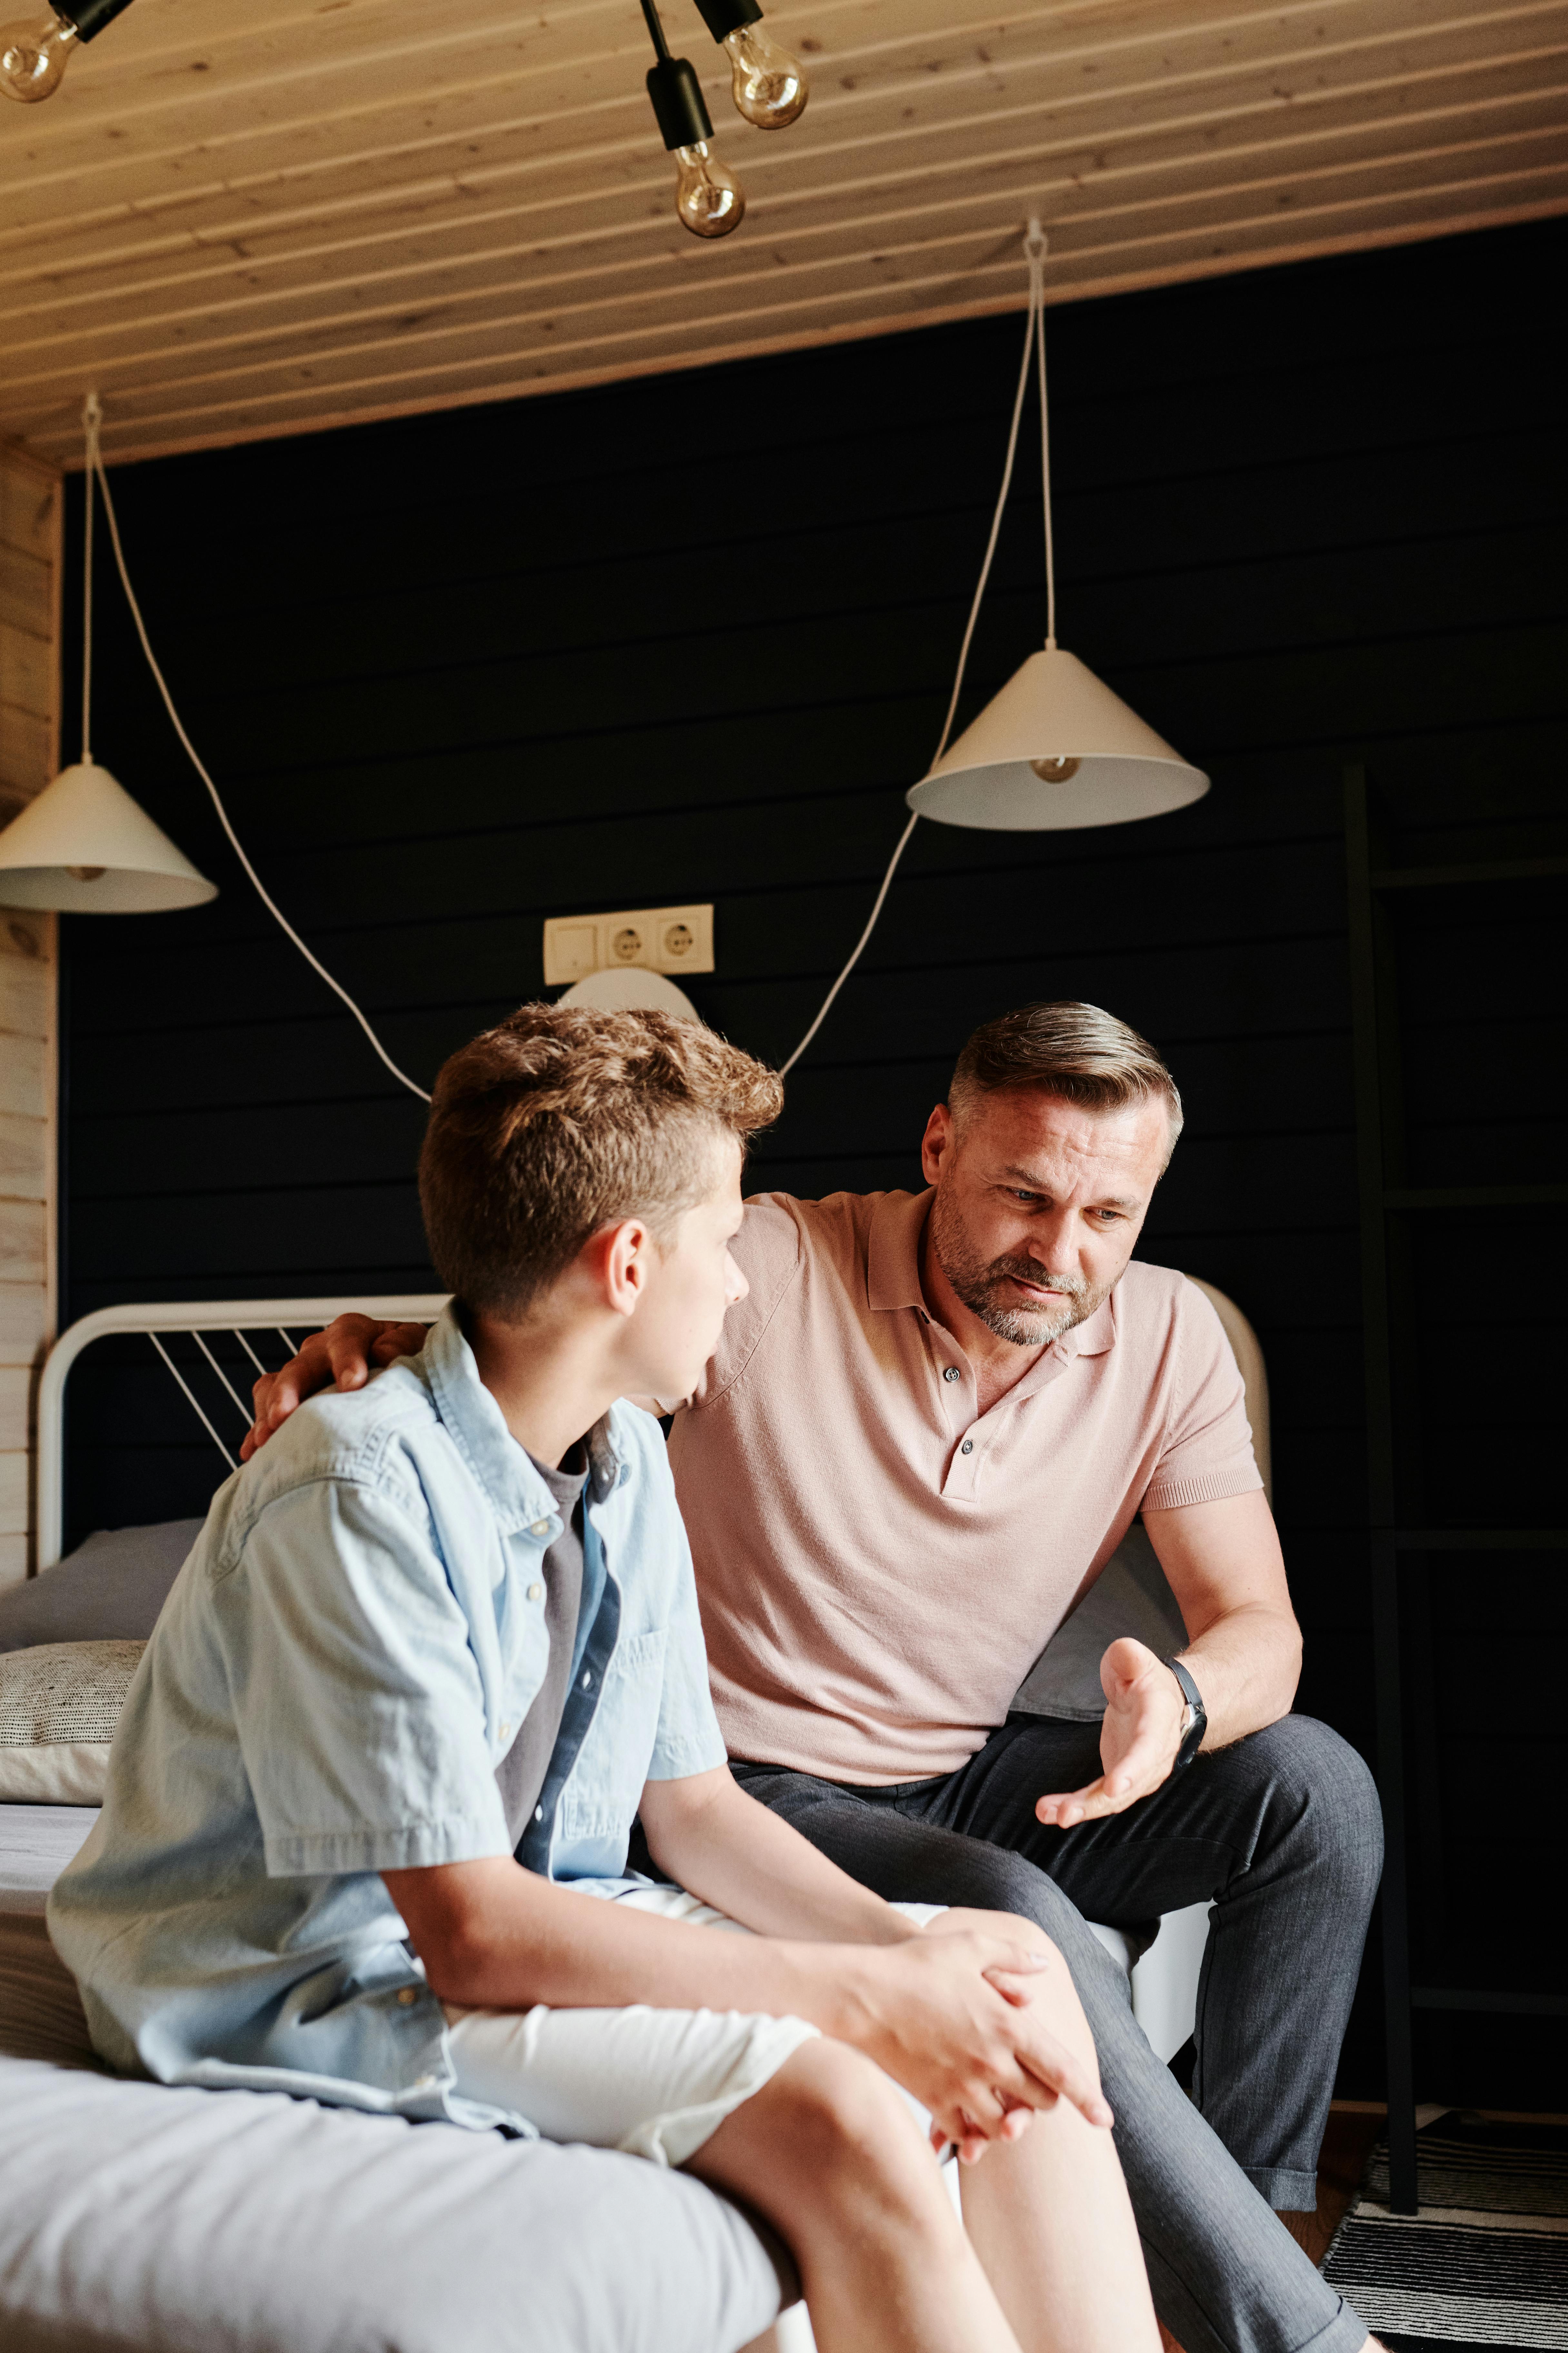 A dad talking to his son | Source: Pexels